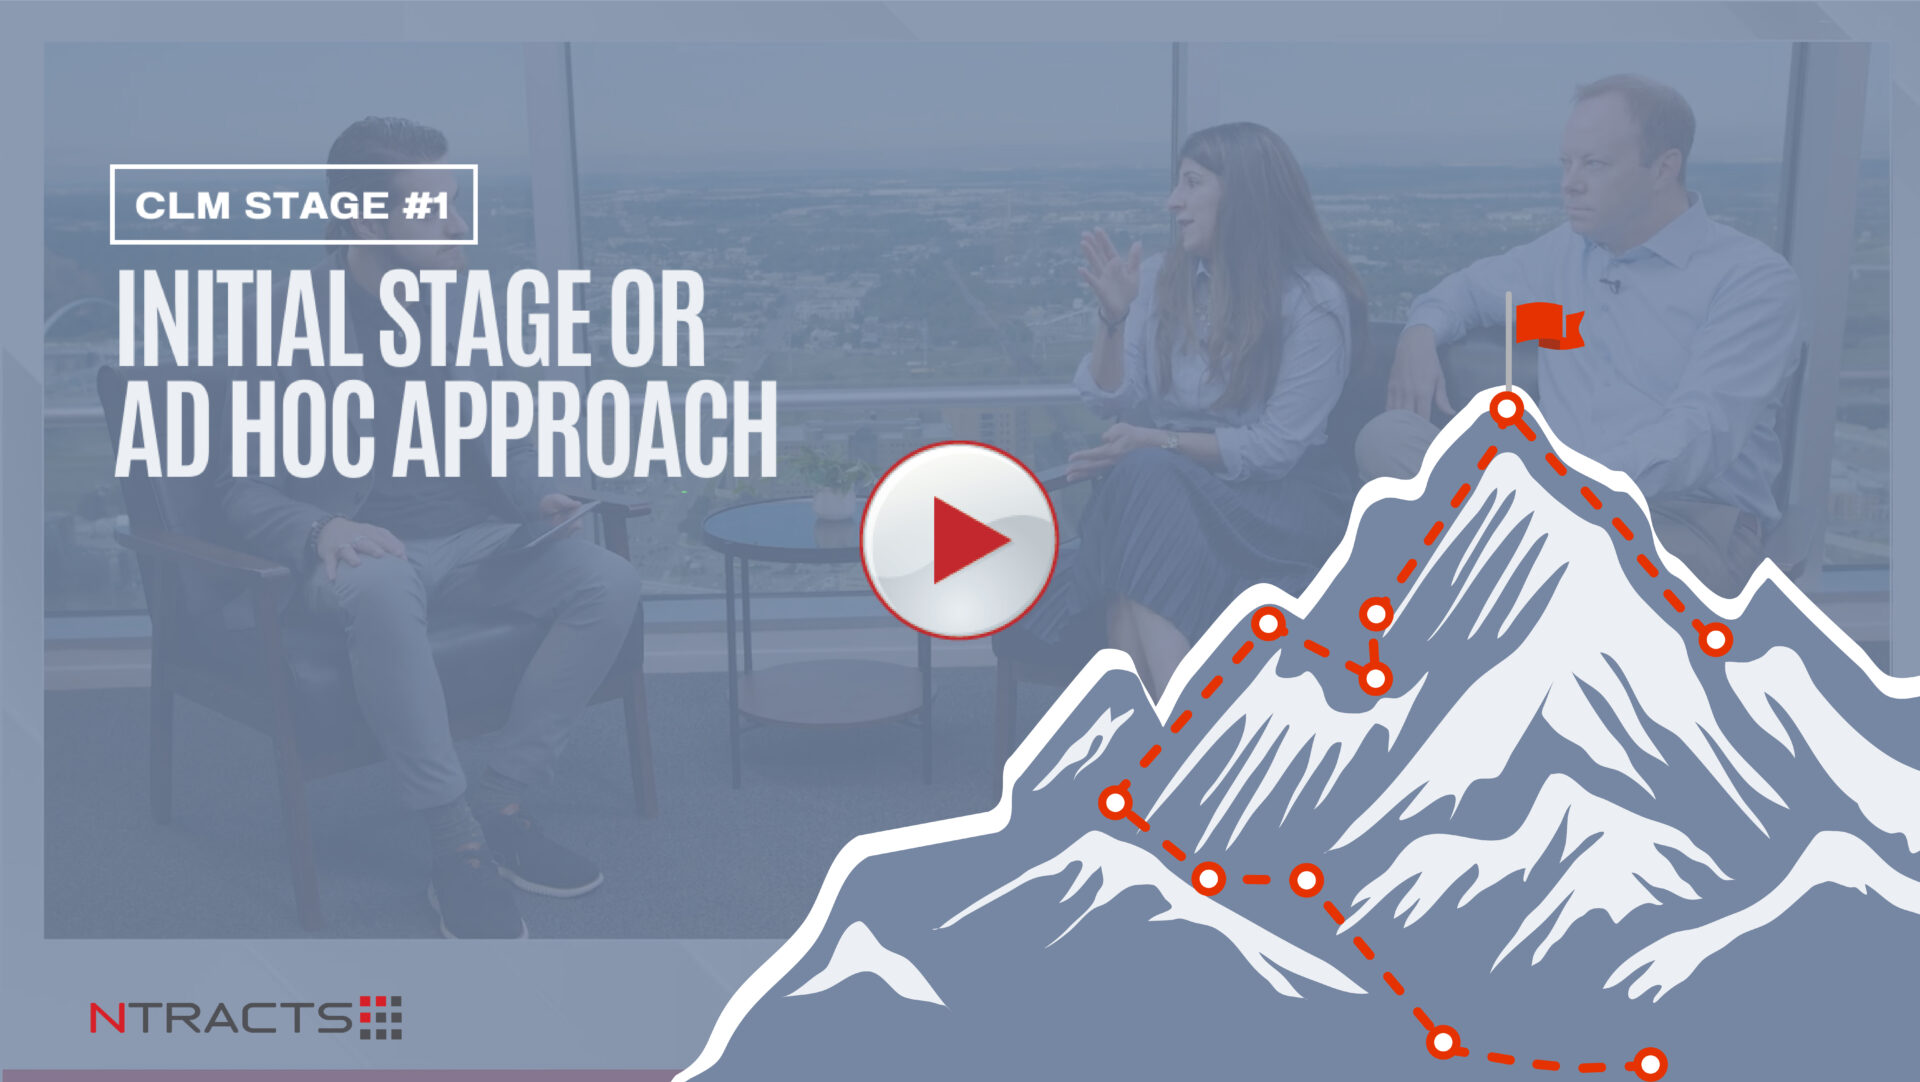 Podcast: CLM Stage #1 Initial Stage or Ad Hoc Approach